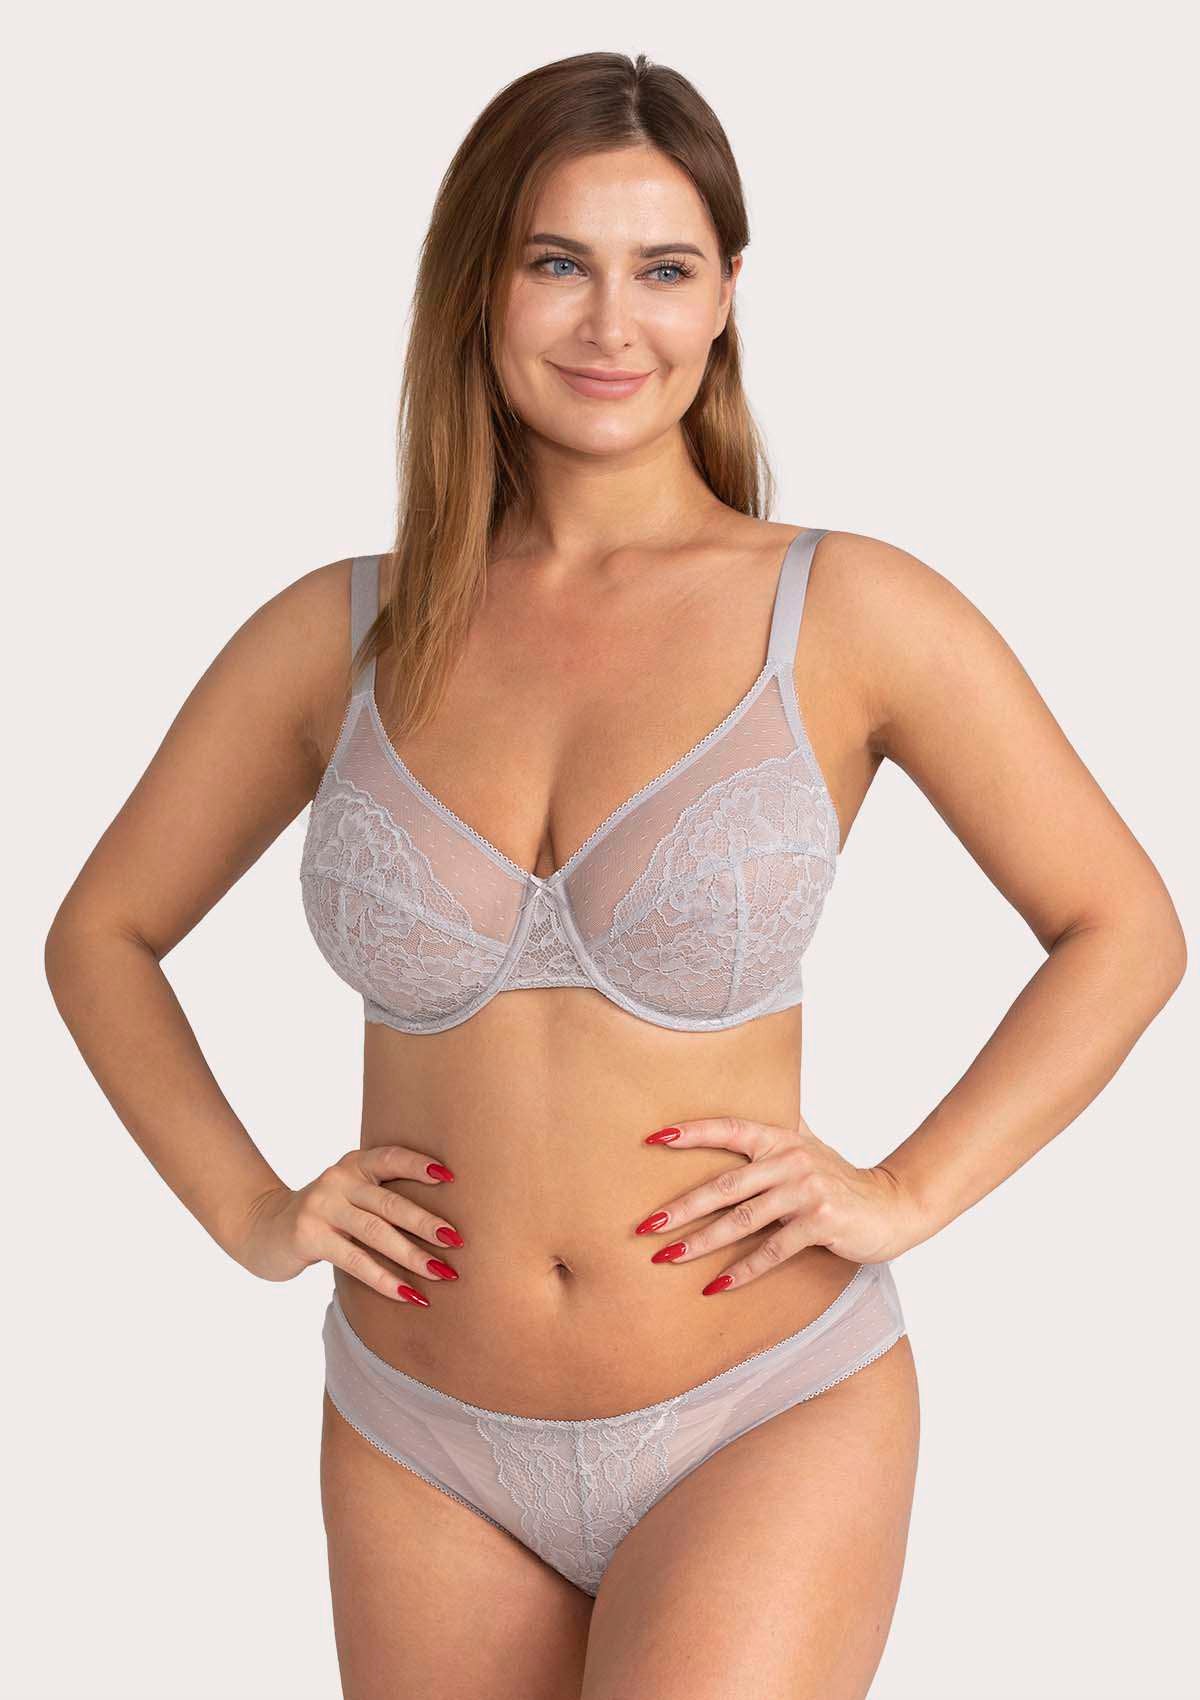 HSIA Enchante Lace Bra And Panties Set: Back Support Bra For Posture - Light Gray / 36 / D